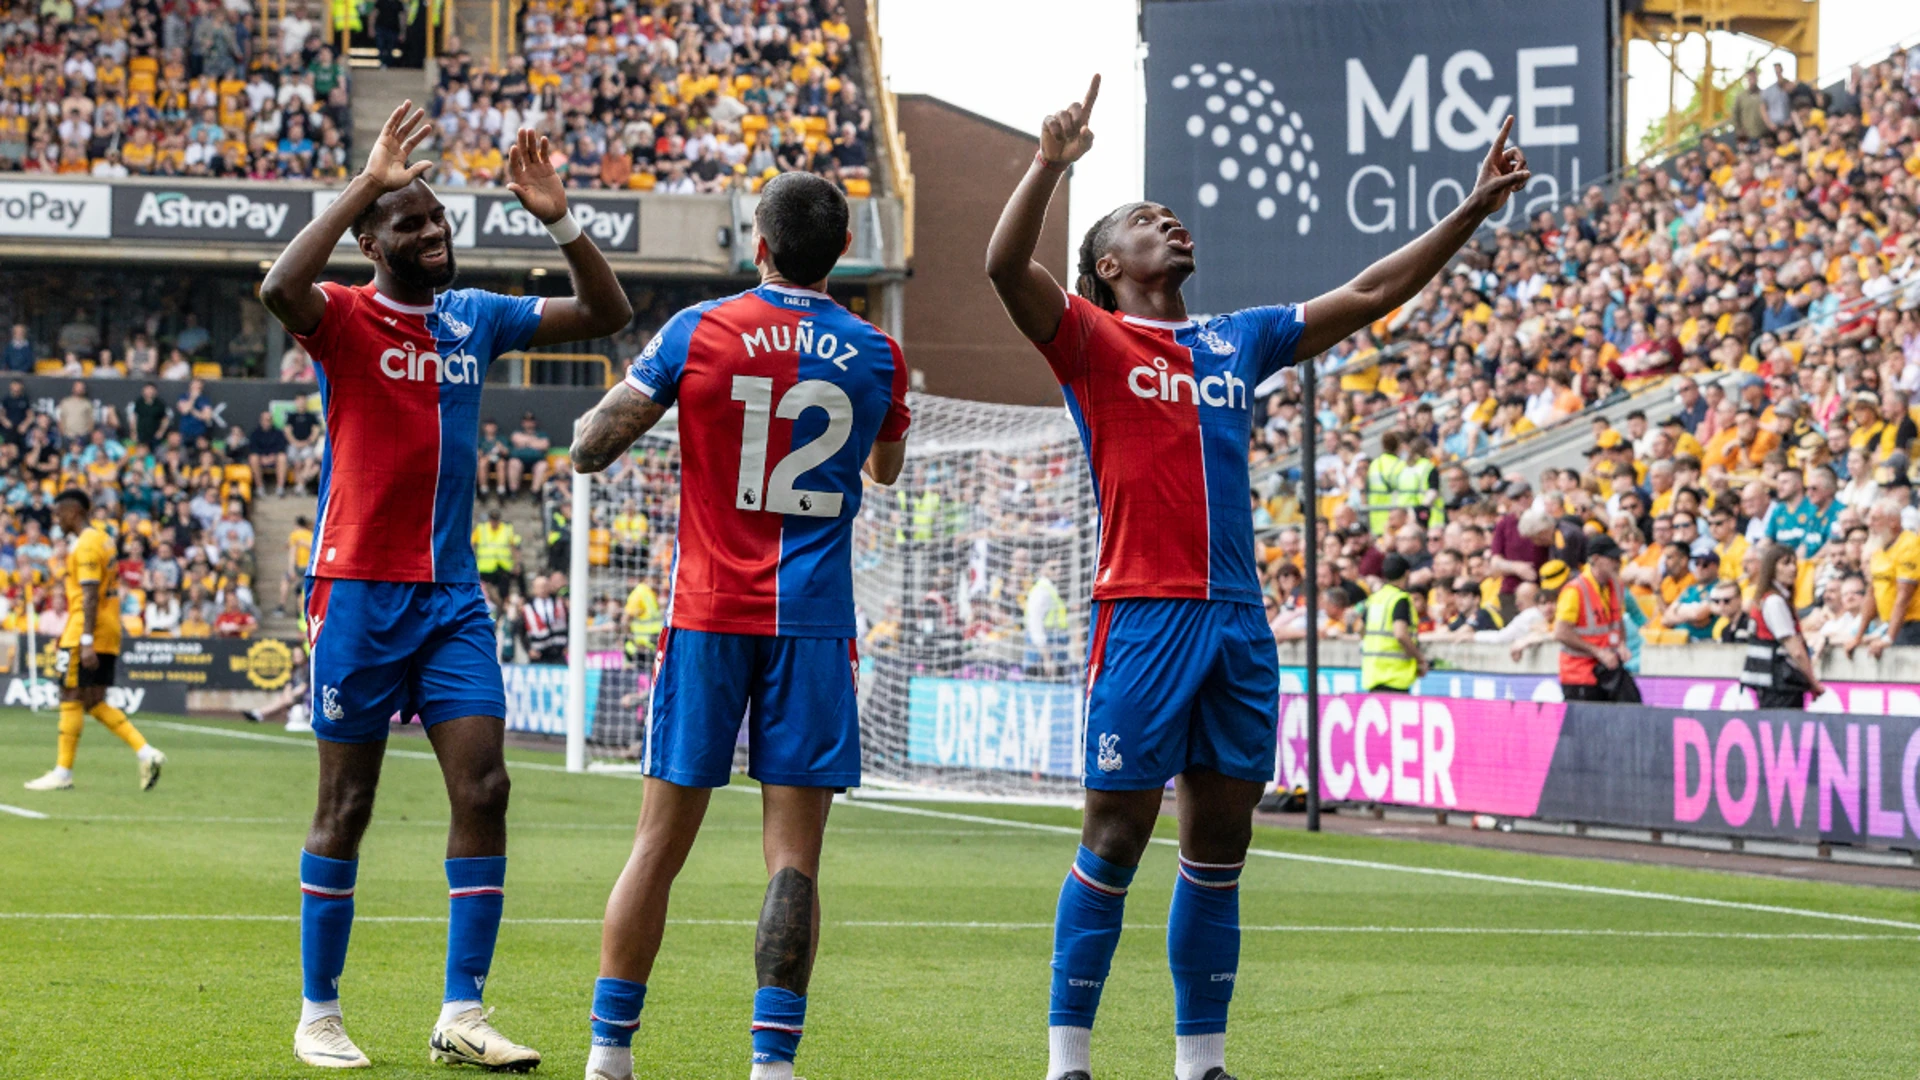 Palace climb past Wolves with their fifth win in six games